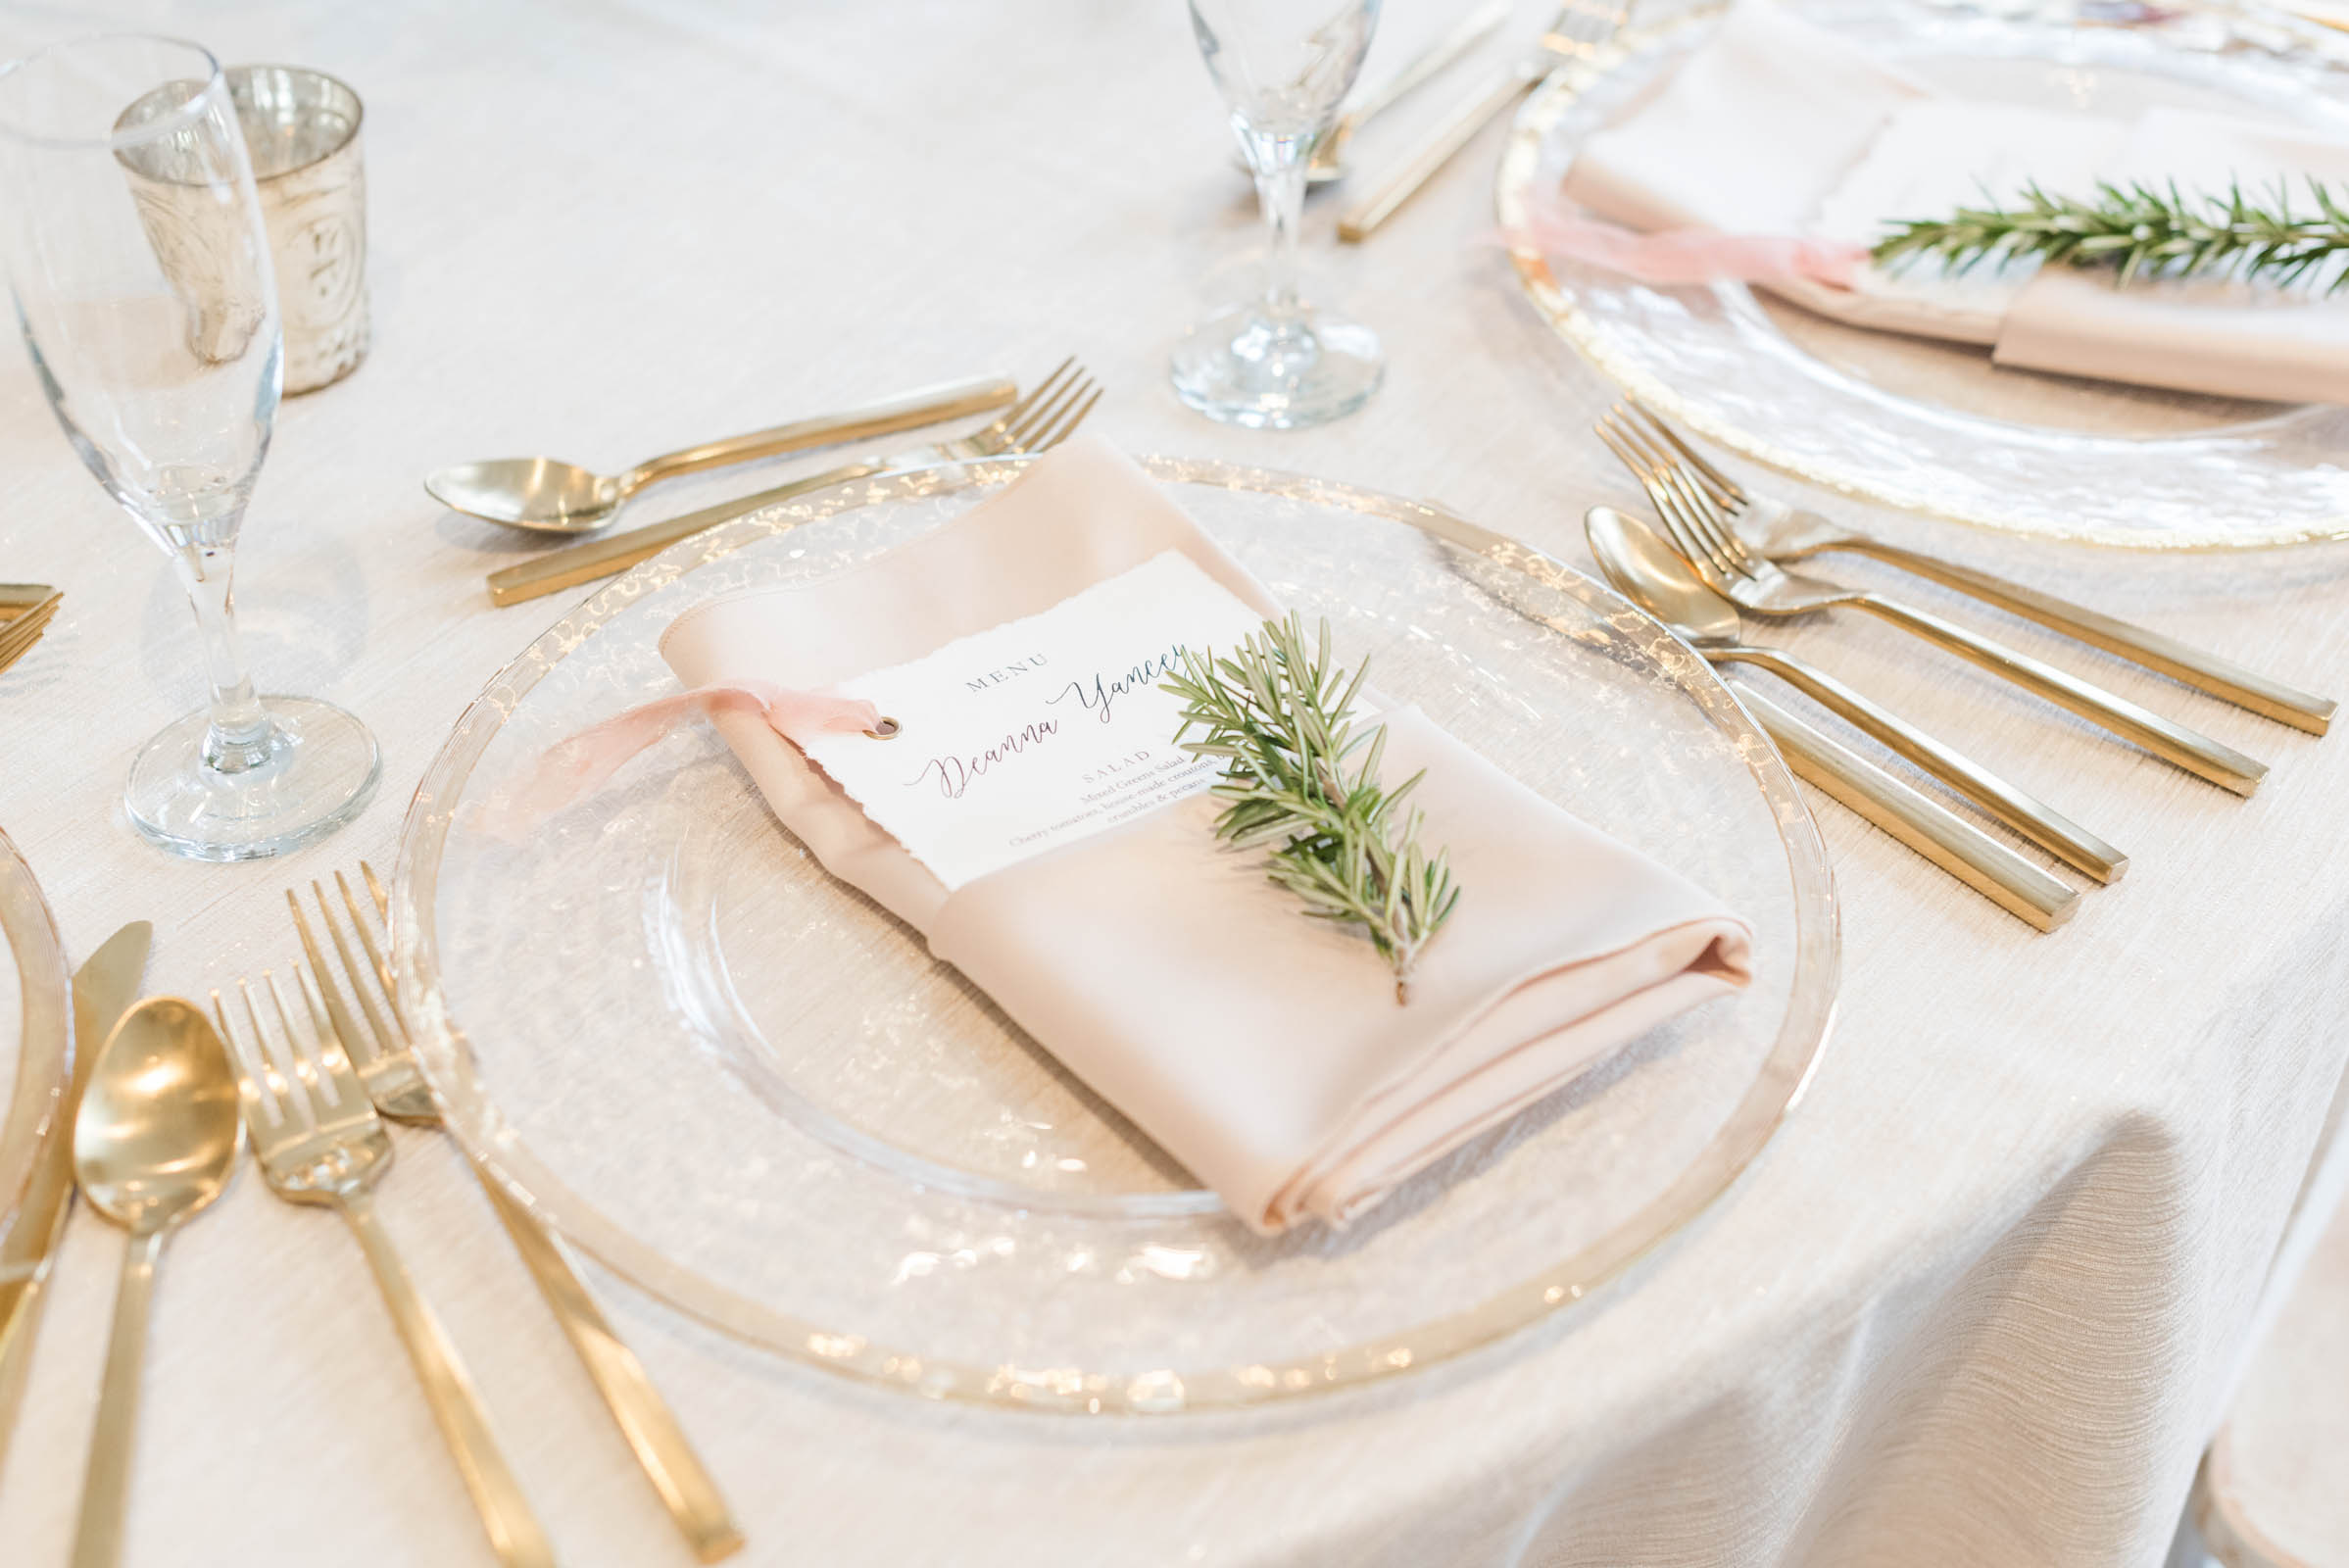 Sydney and Conner: Blush and Gold Wedding At The Estate At New Albany, Sweet Williams Photography